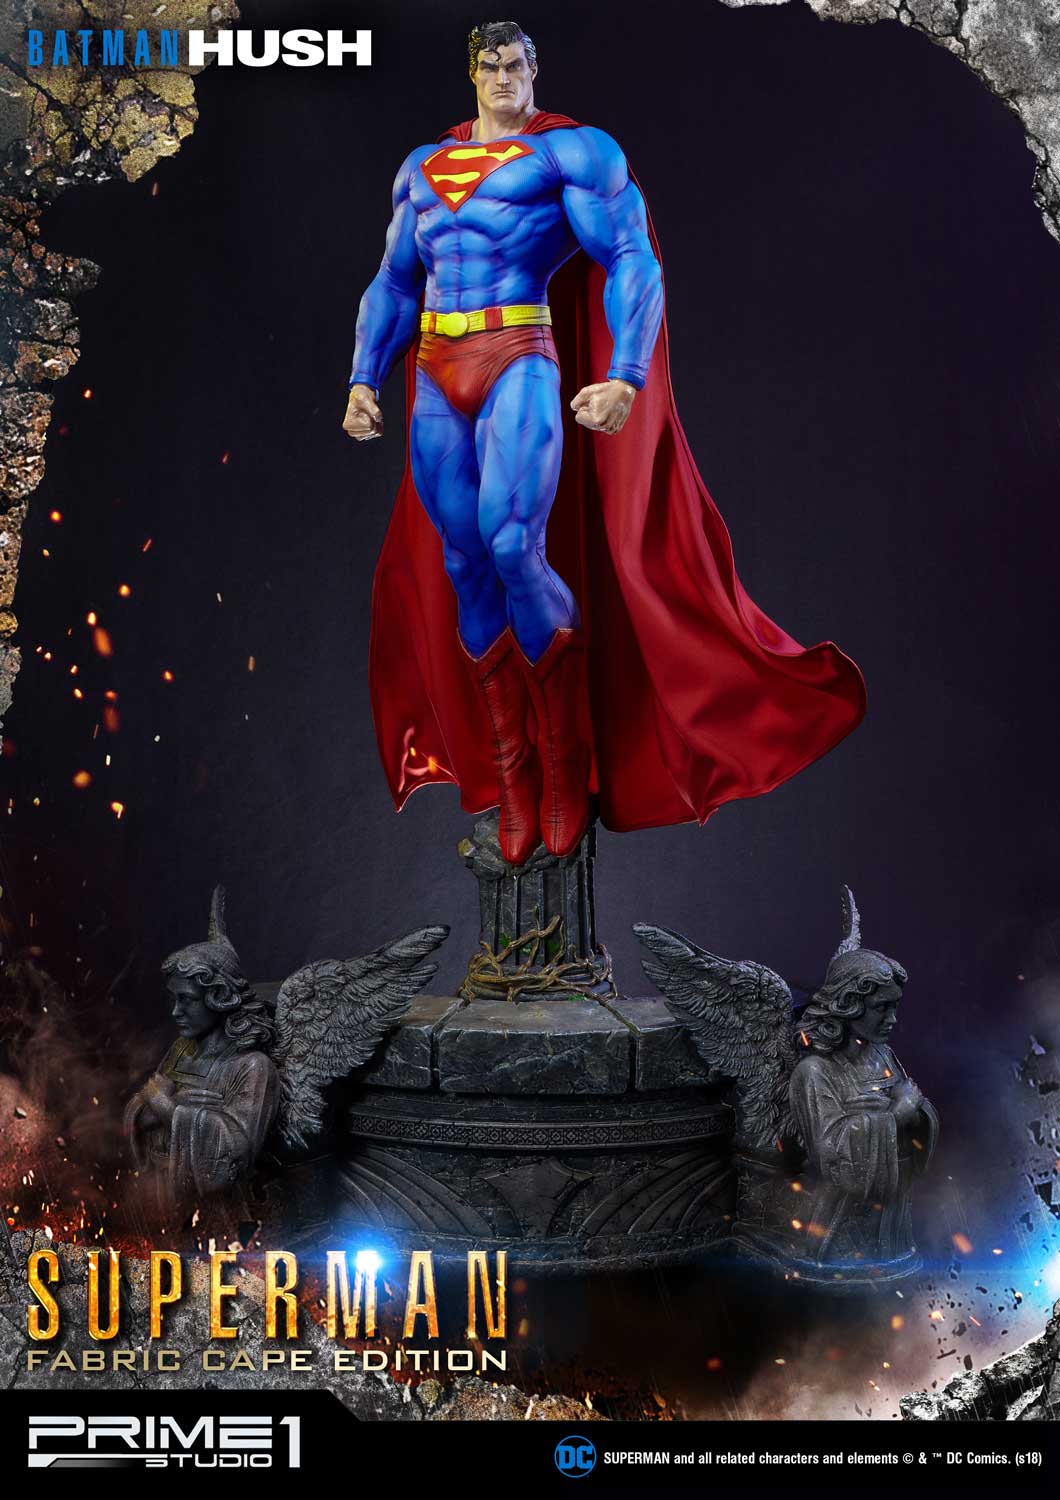 Lottery Sale of Statues Signed by Jim Lee is OPEN-3